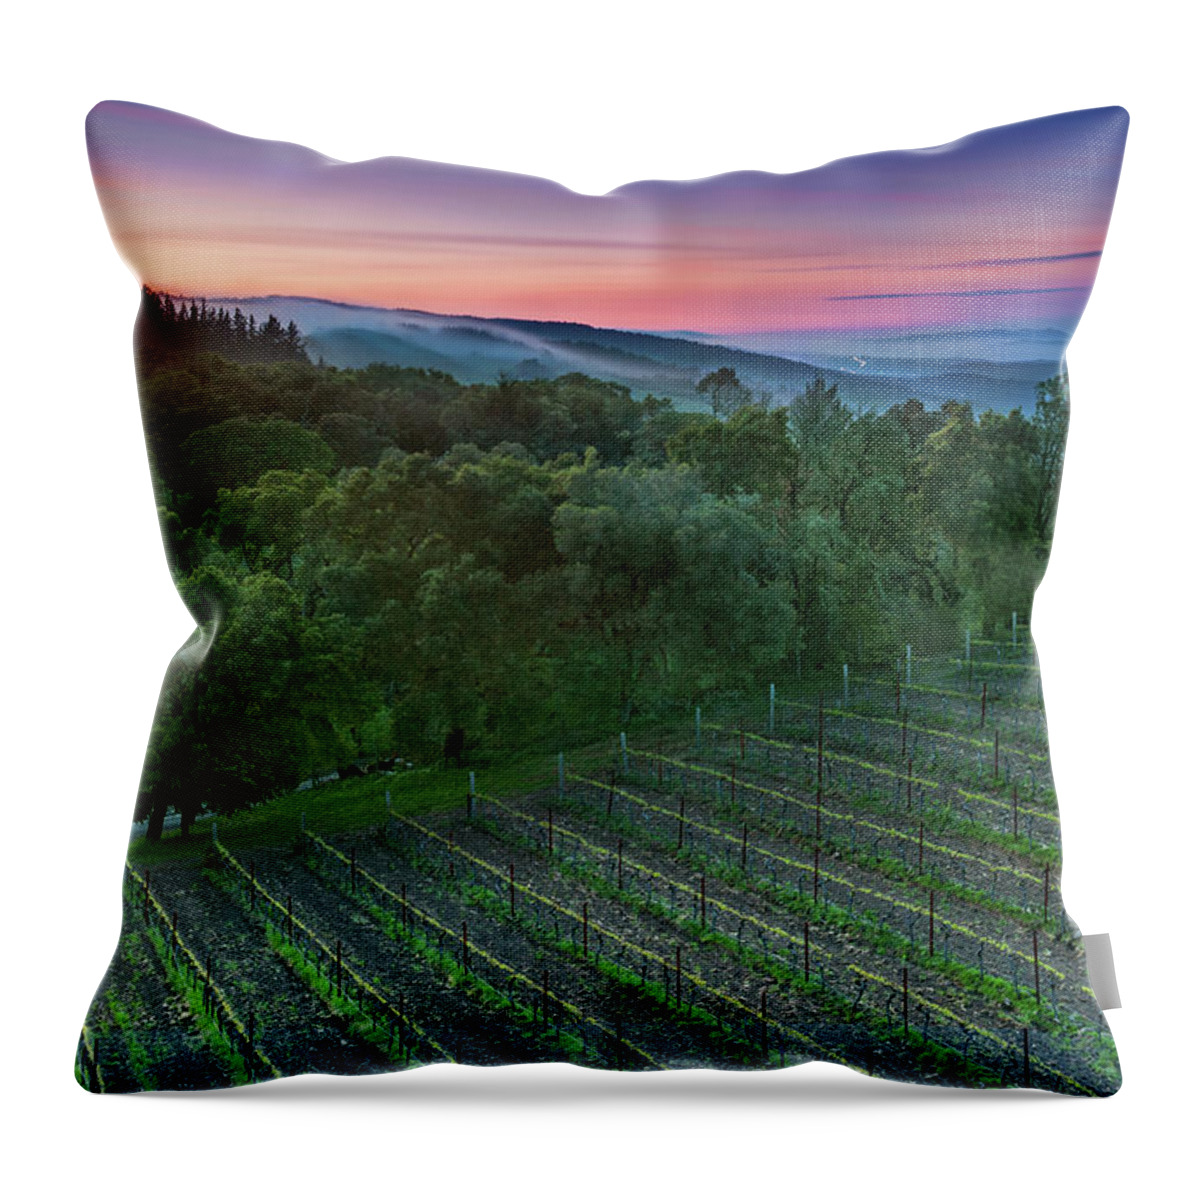 Scenics Throw Pillow featuring the photograph Thomas Fog-erty by Aaron Meyers